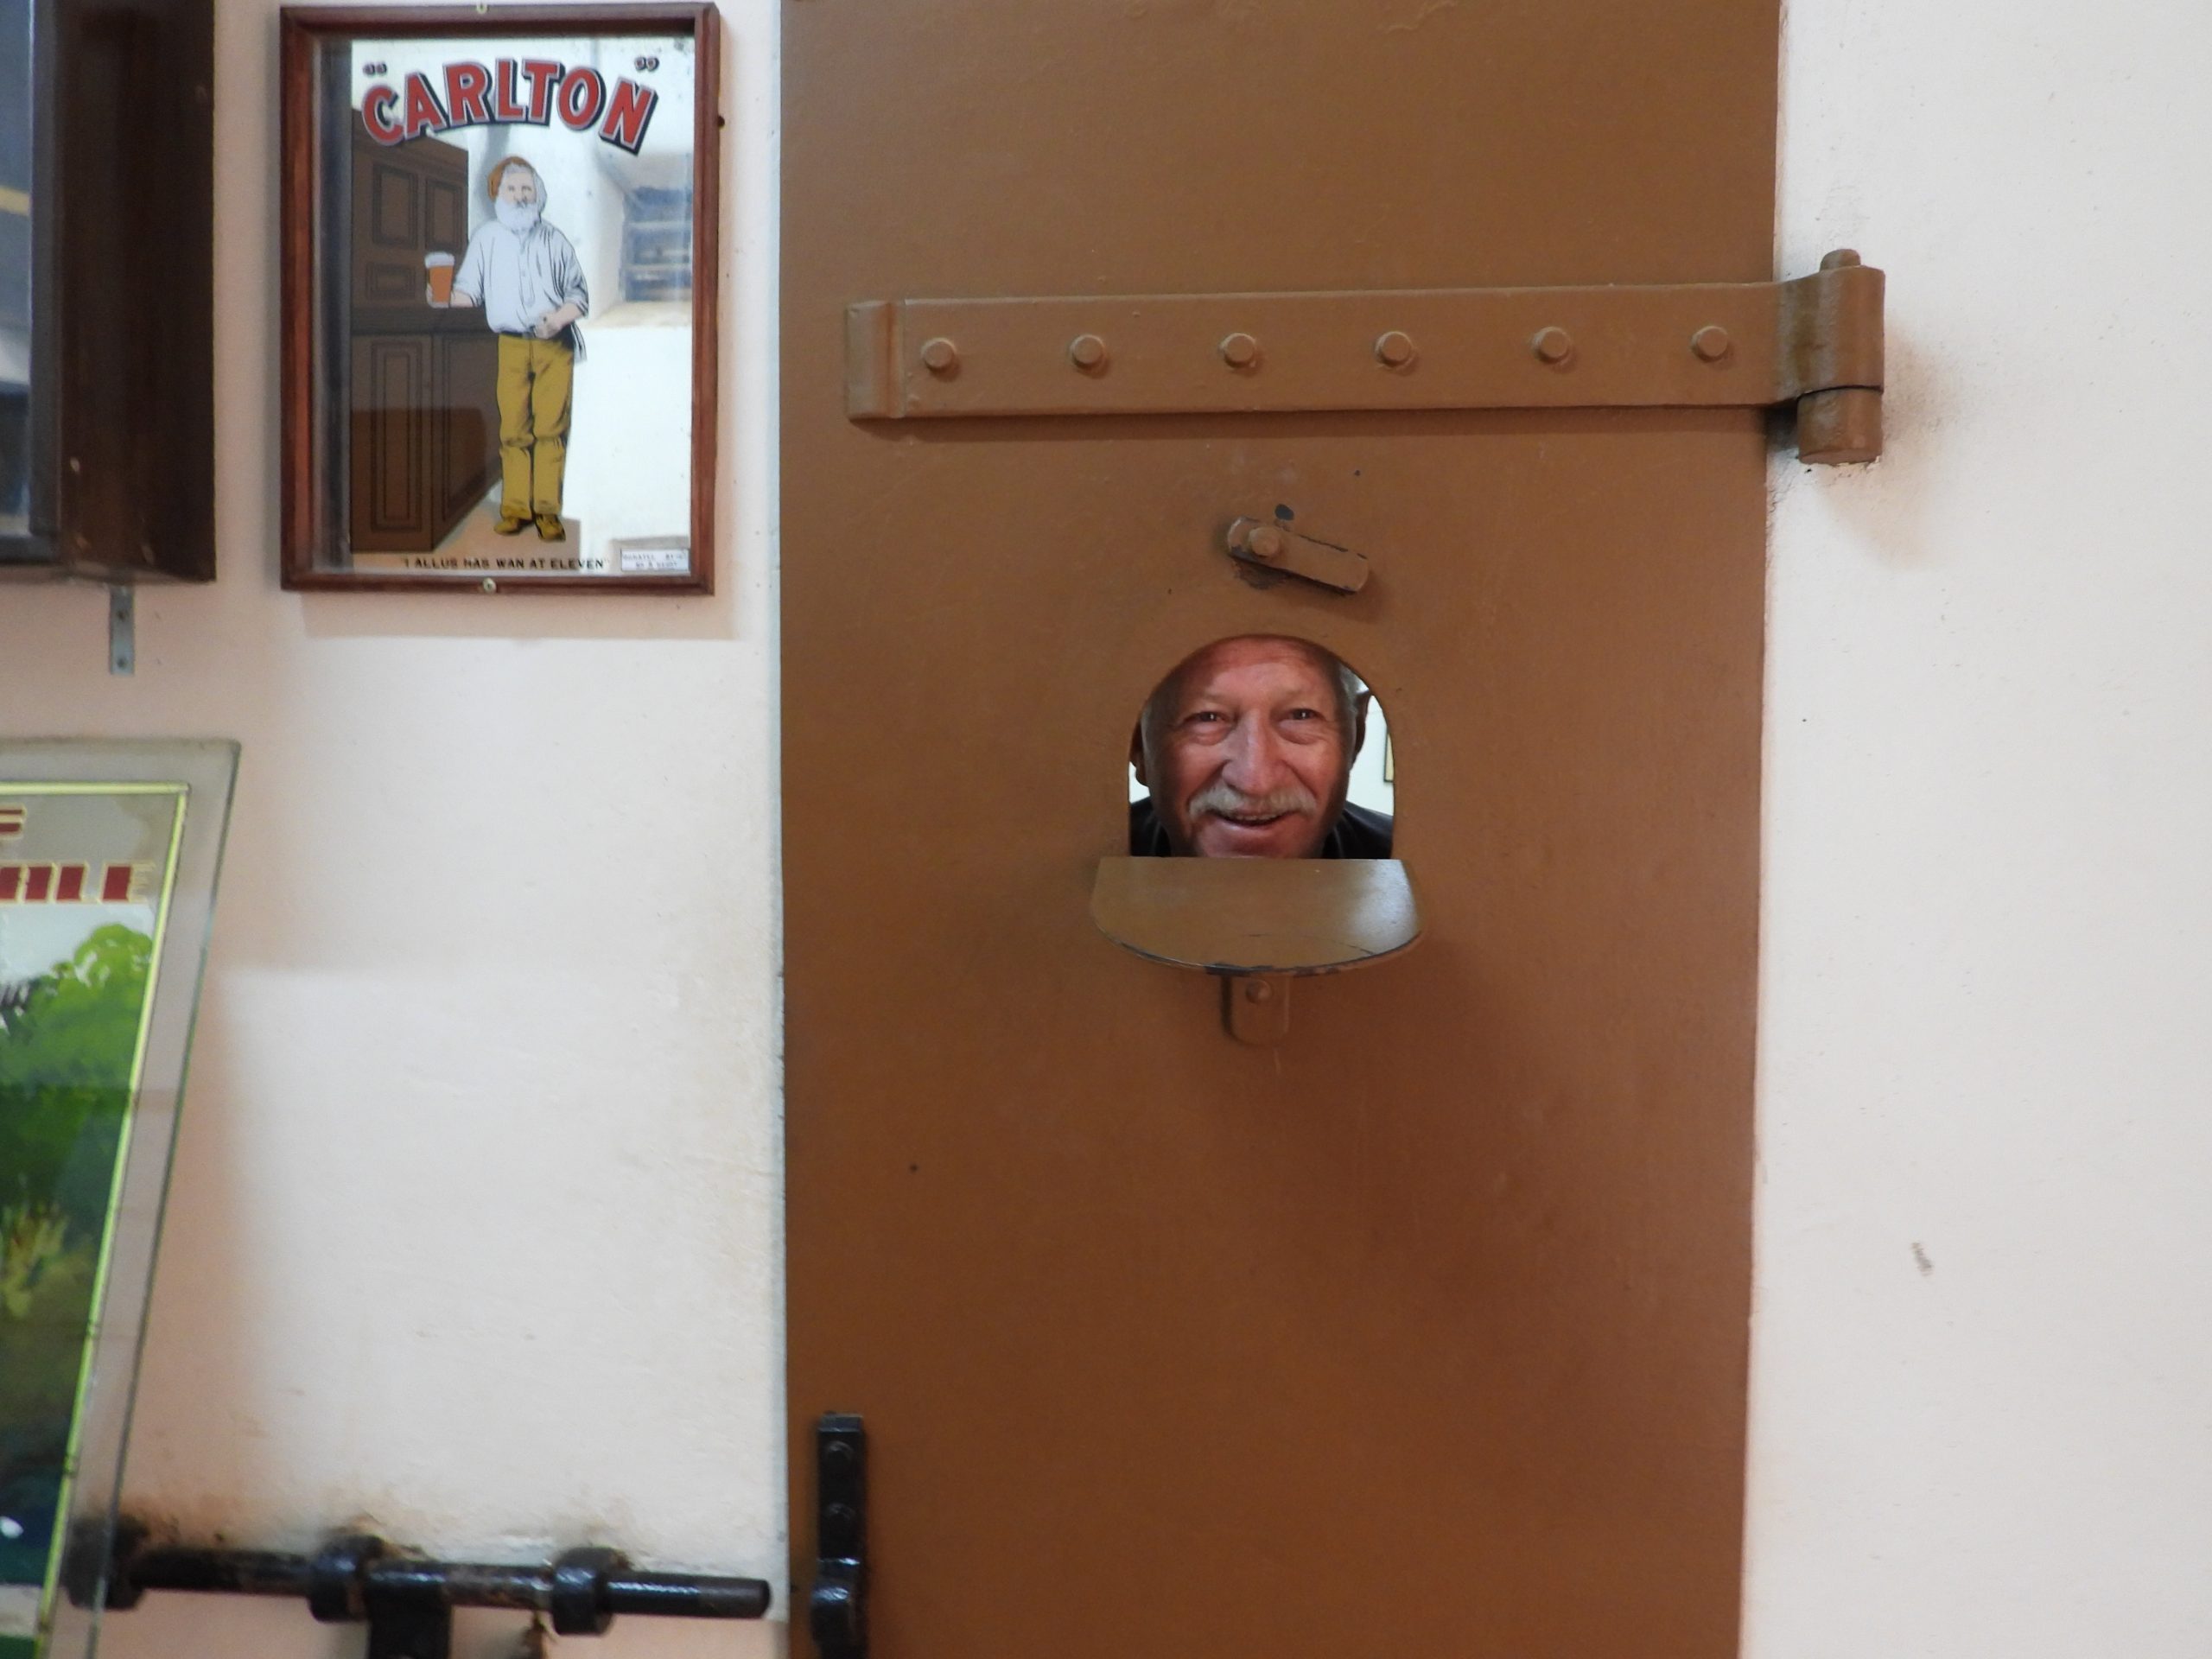 Ross Wecker looks out from behind a cell door. PICTURE: EVE-LYN KENNEDY